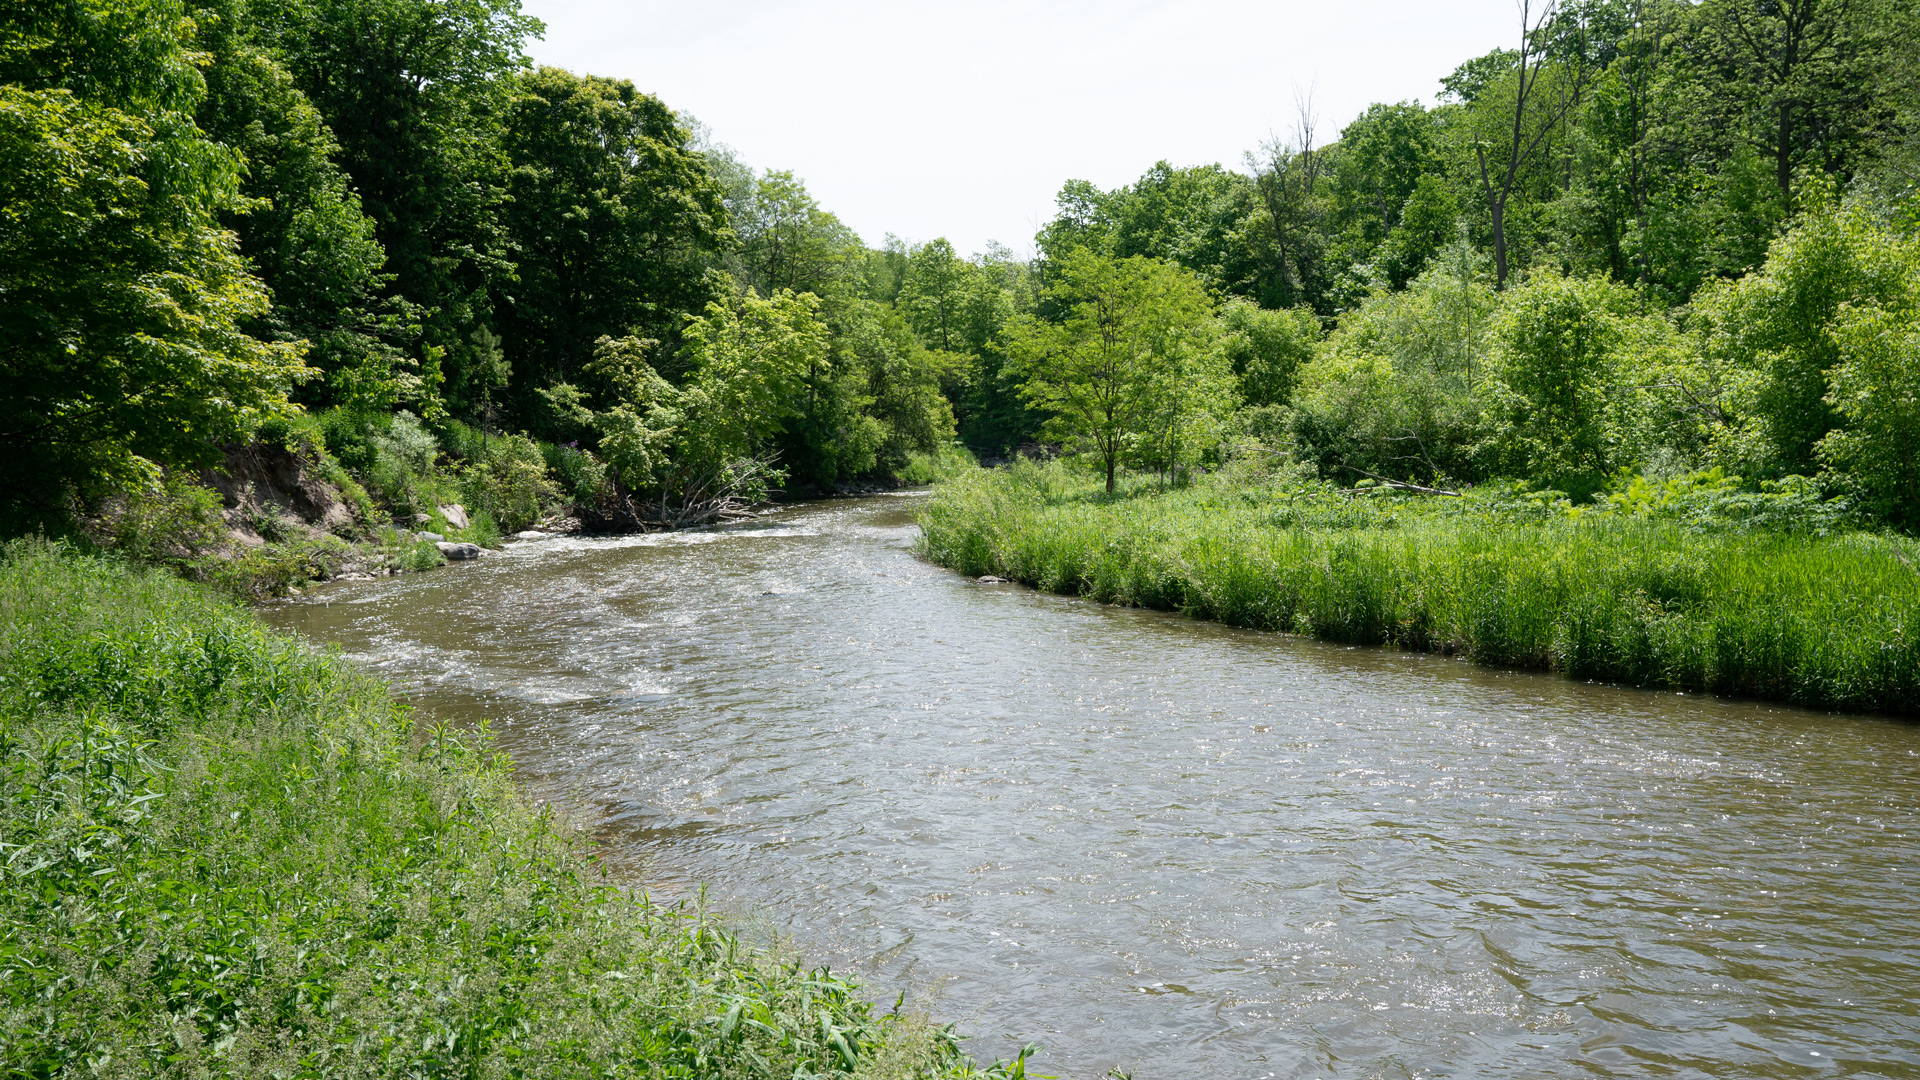 Schitts Creek 3 - River and green landscape